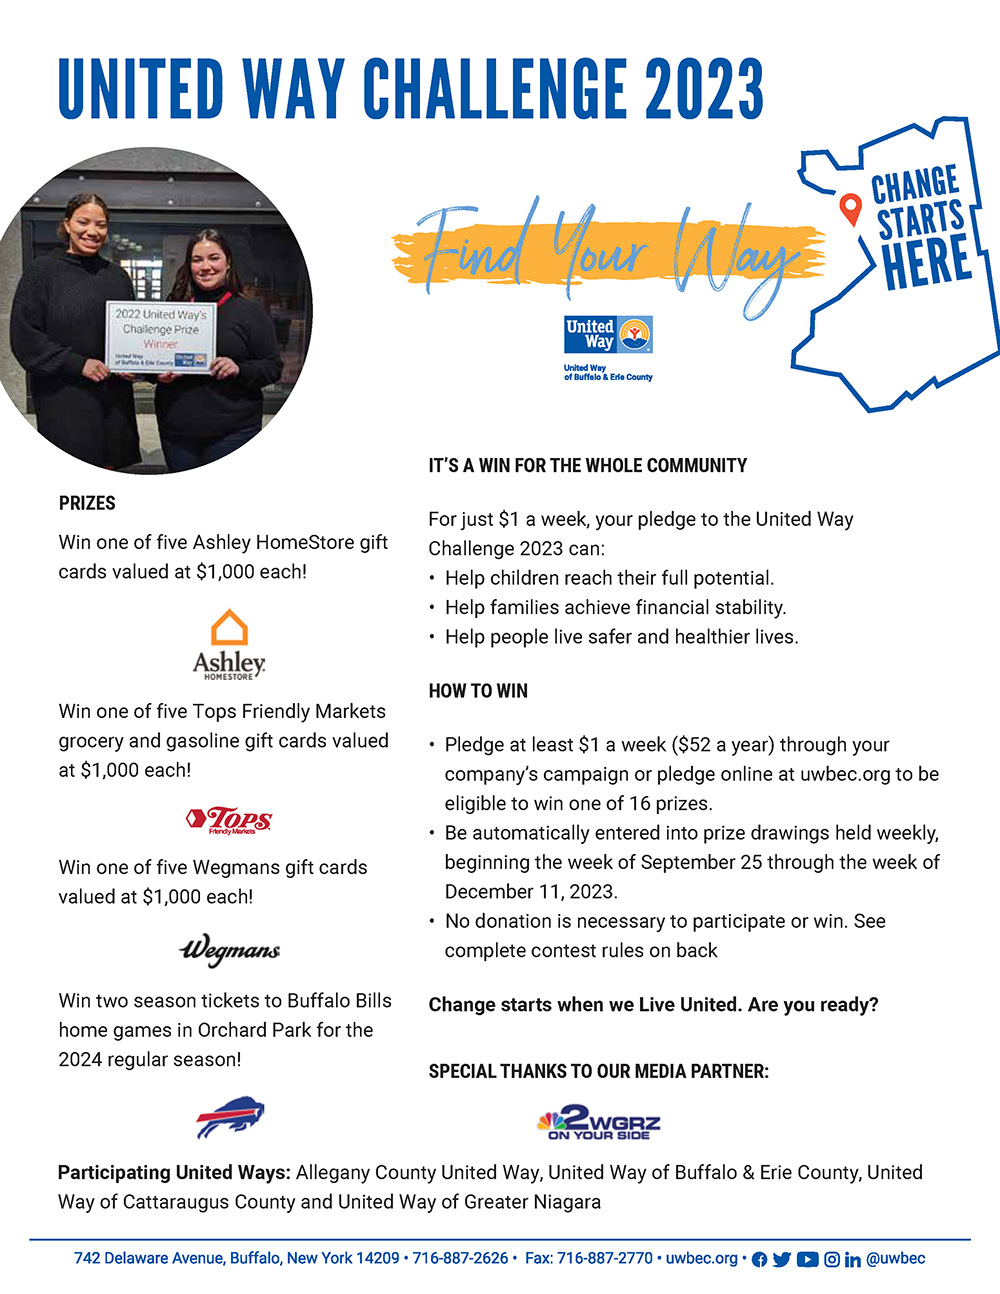  A picture of United Way Challenge Flyer